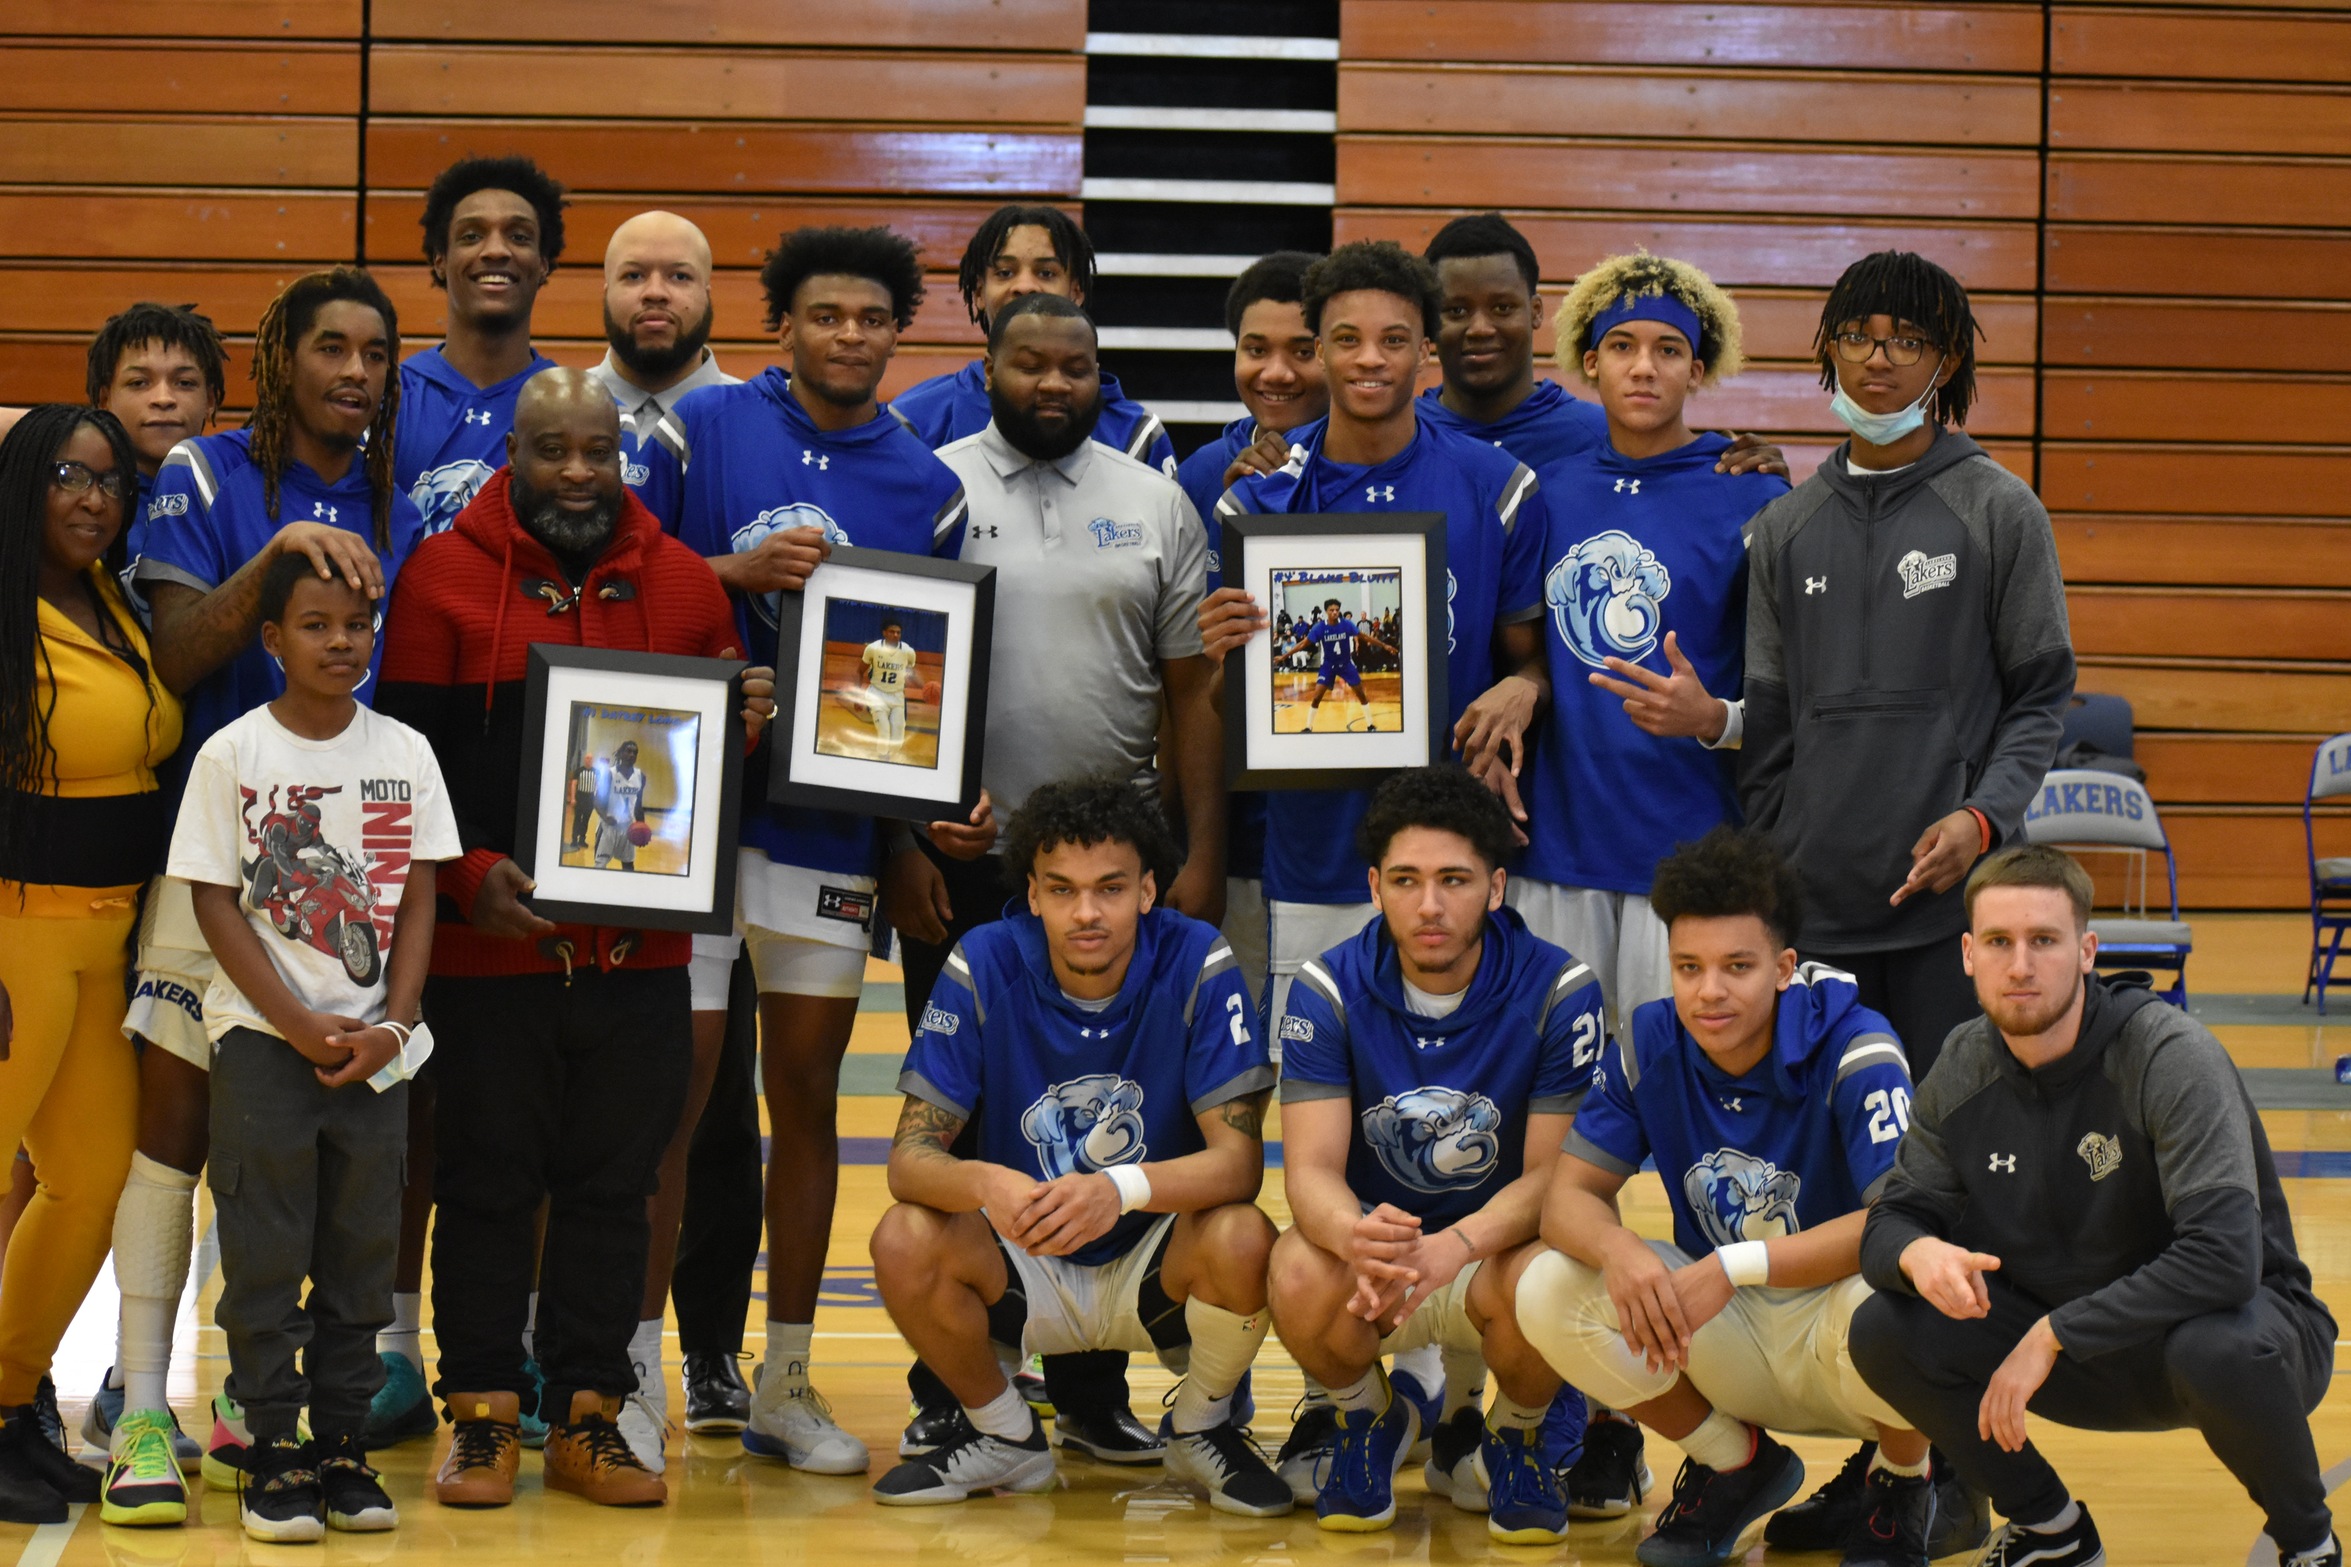 Lakers team with recognized sophomores